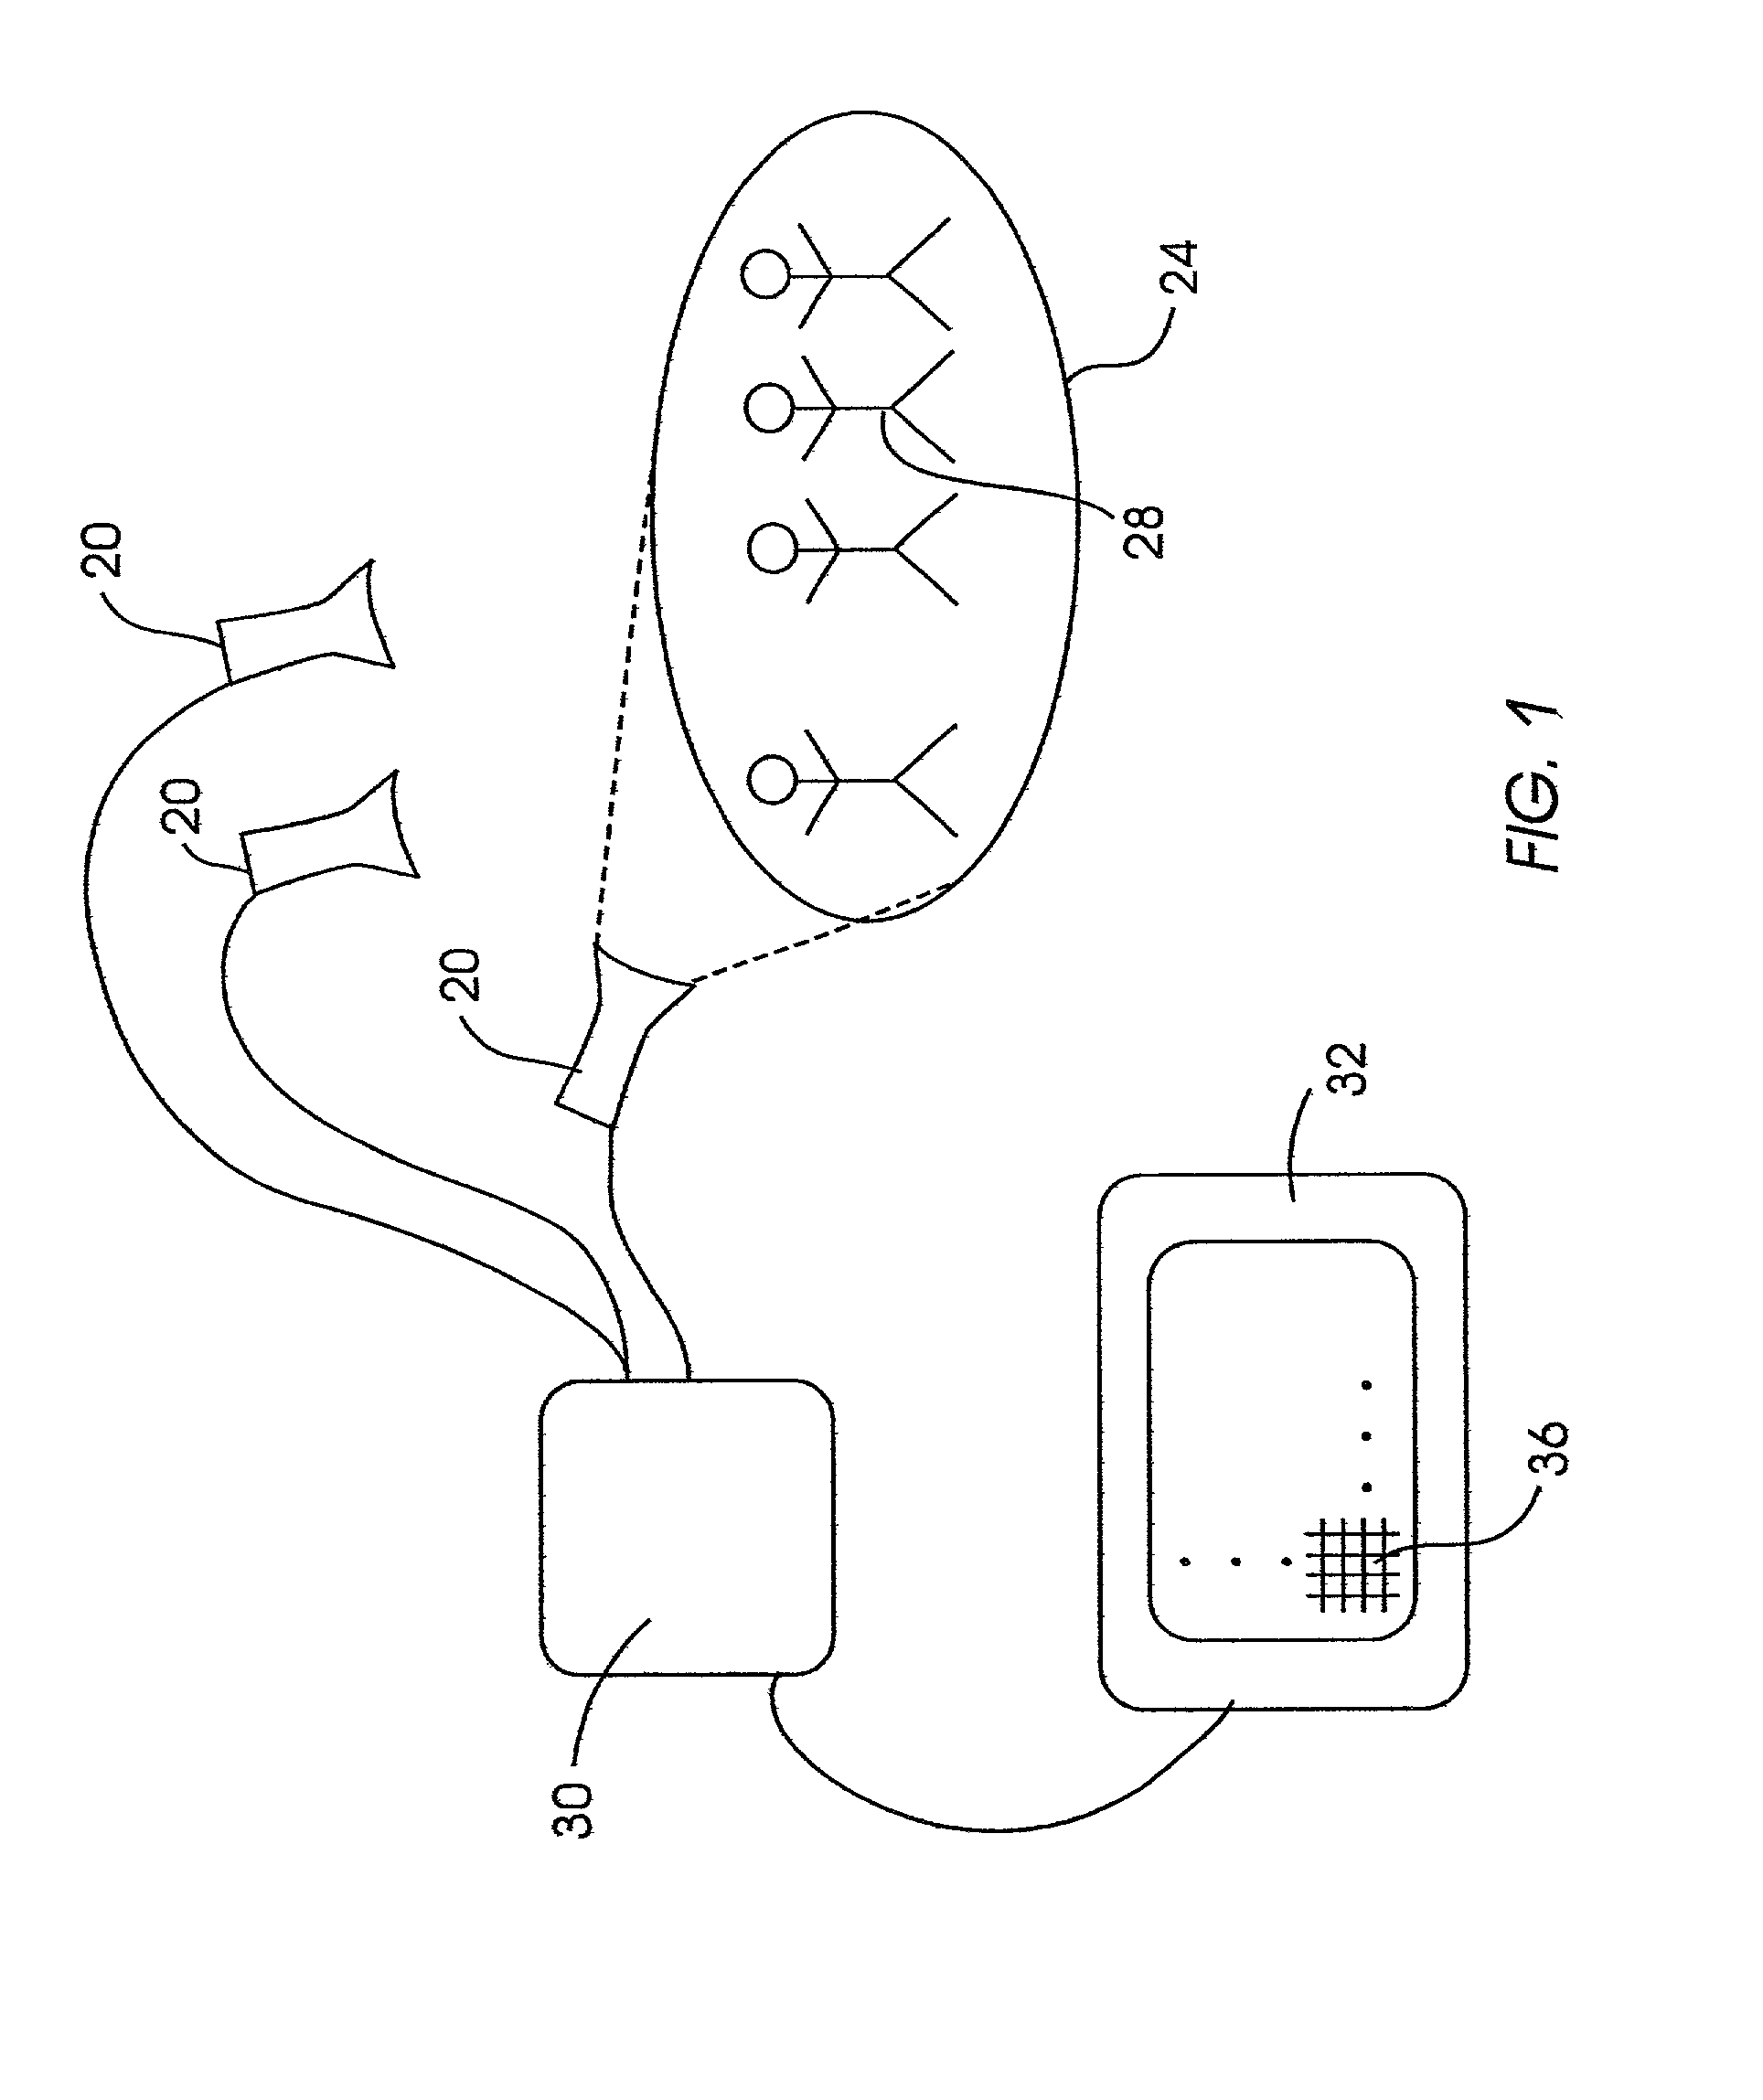 Method of detecting and tracking groups of people